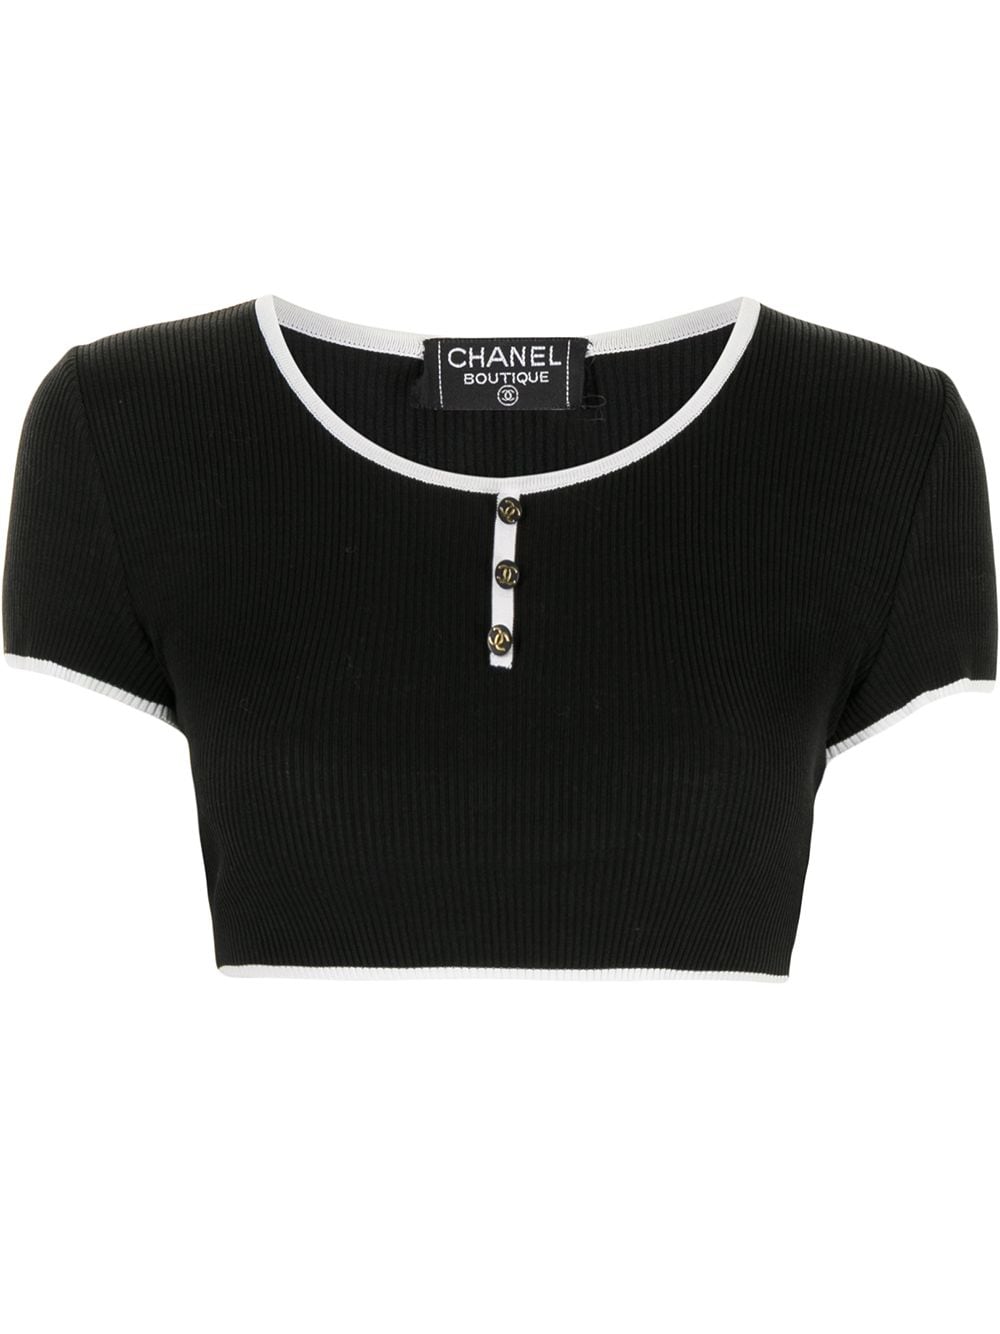 CHANEL Pre-Owned 1995 Ribbed Crop Top - Farfetch